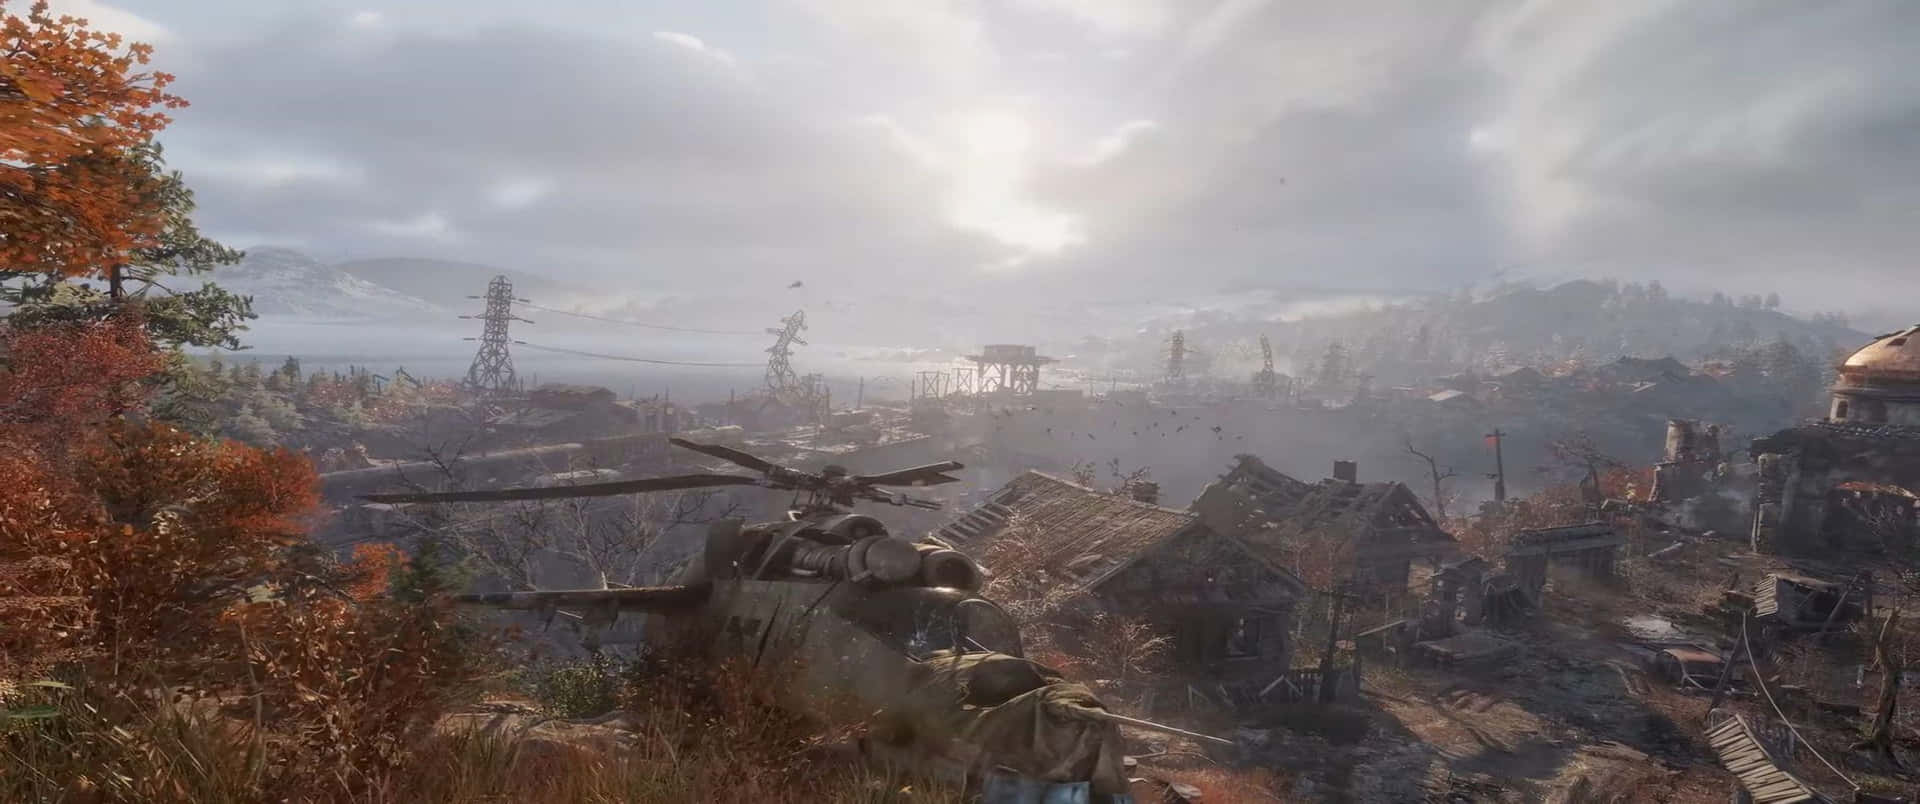 Video Game Wrecked Helicopter 3440x1440p Metro Exodus Background